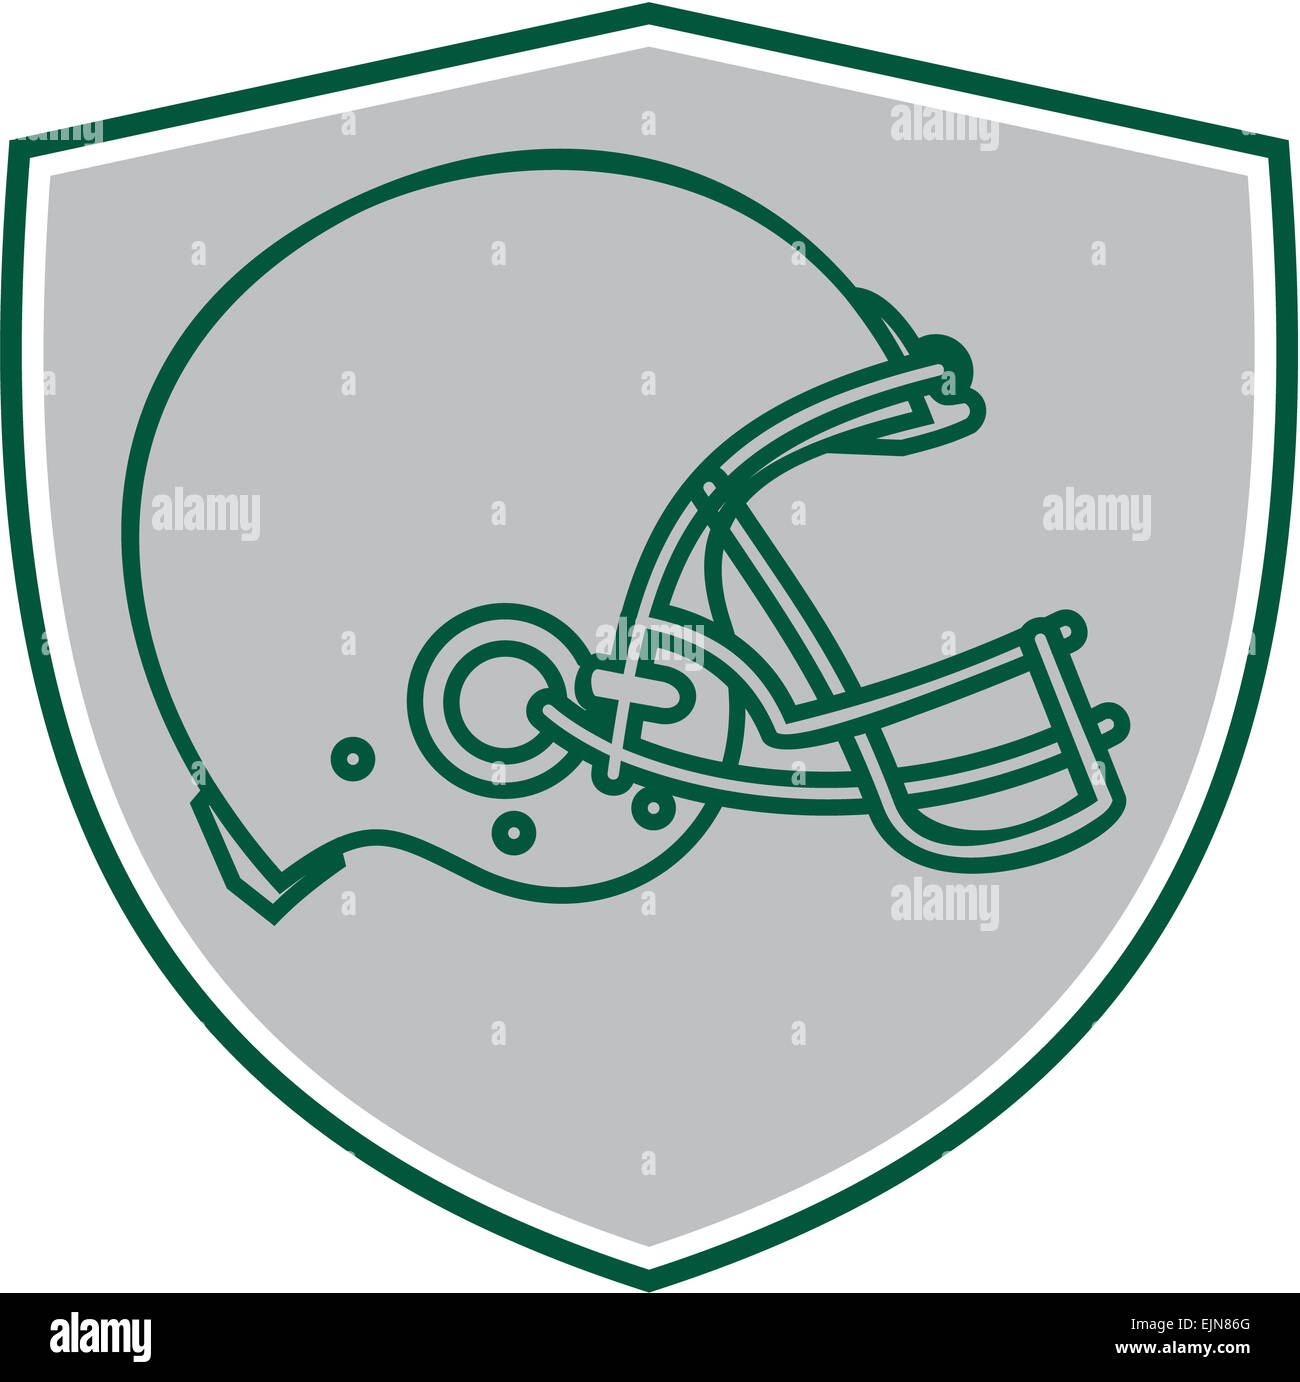 Line drawing illustration of an american football helmet viewed from the side set inside shield crest done in retro style. Stock Photo